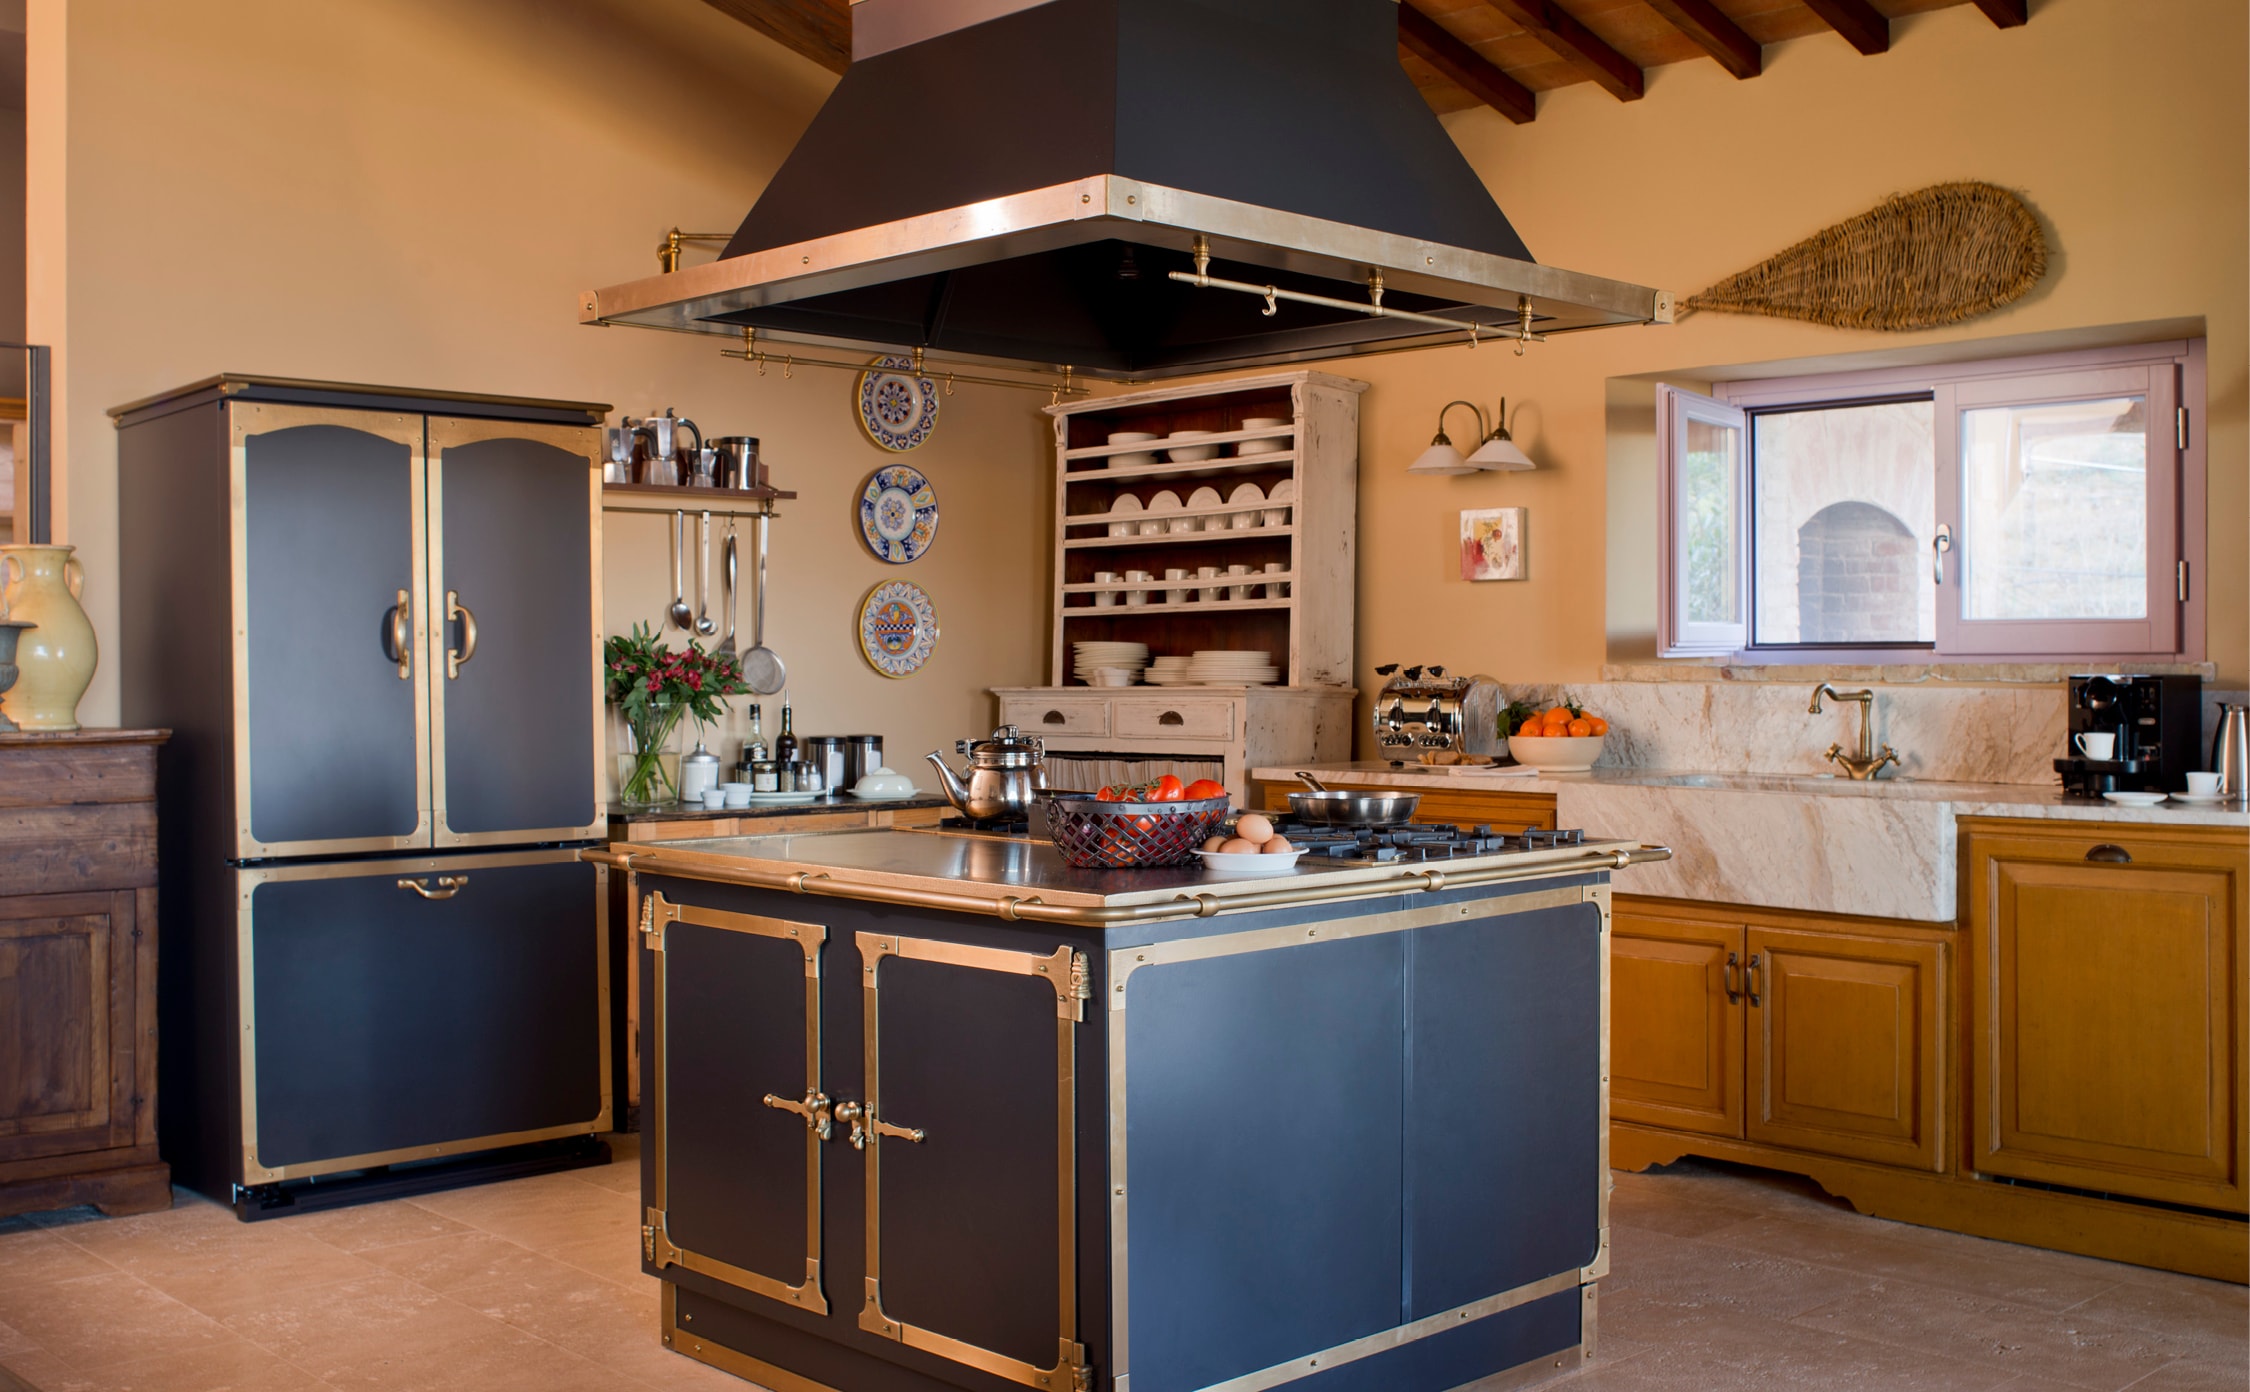 Italian kitchen design when it is in the heart of tuscany must be both soulful and functional to be apropos